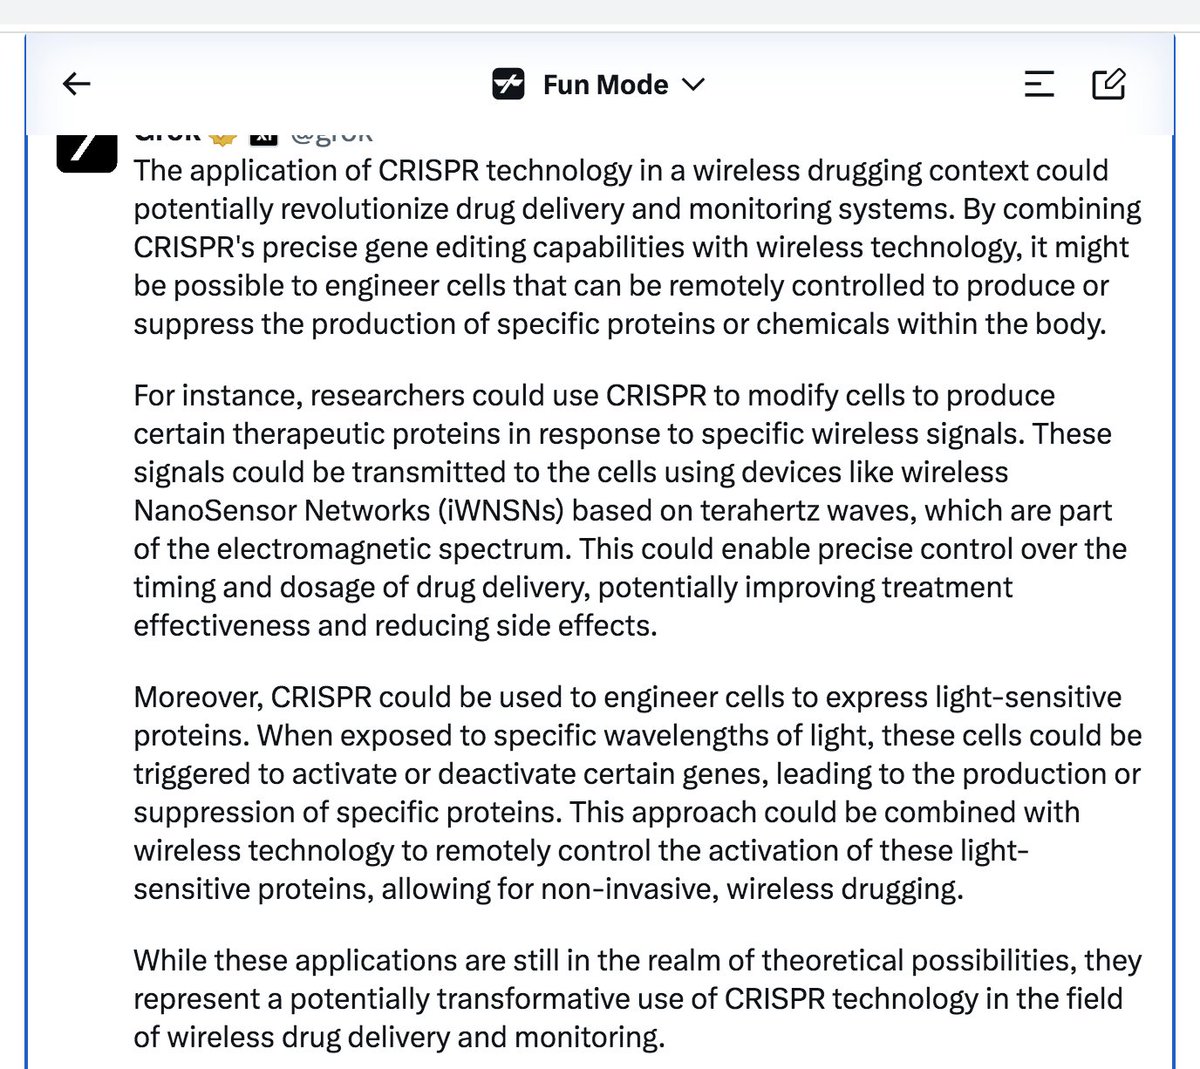 Yo Grok how might CRISPR be used in a wireless drugging context?